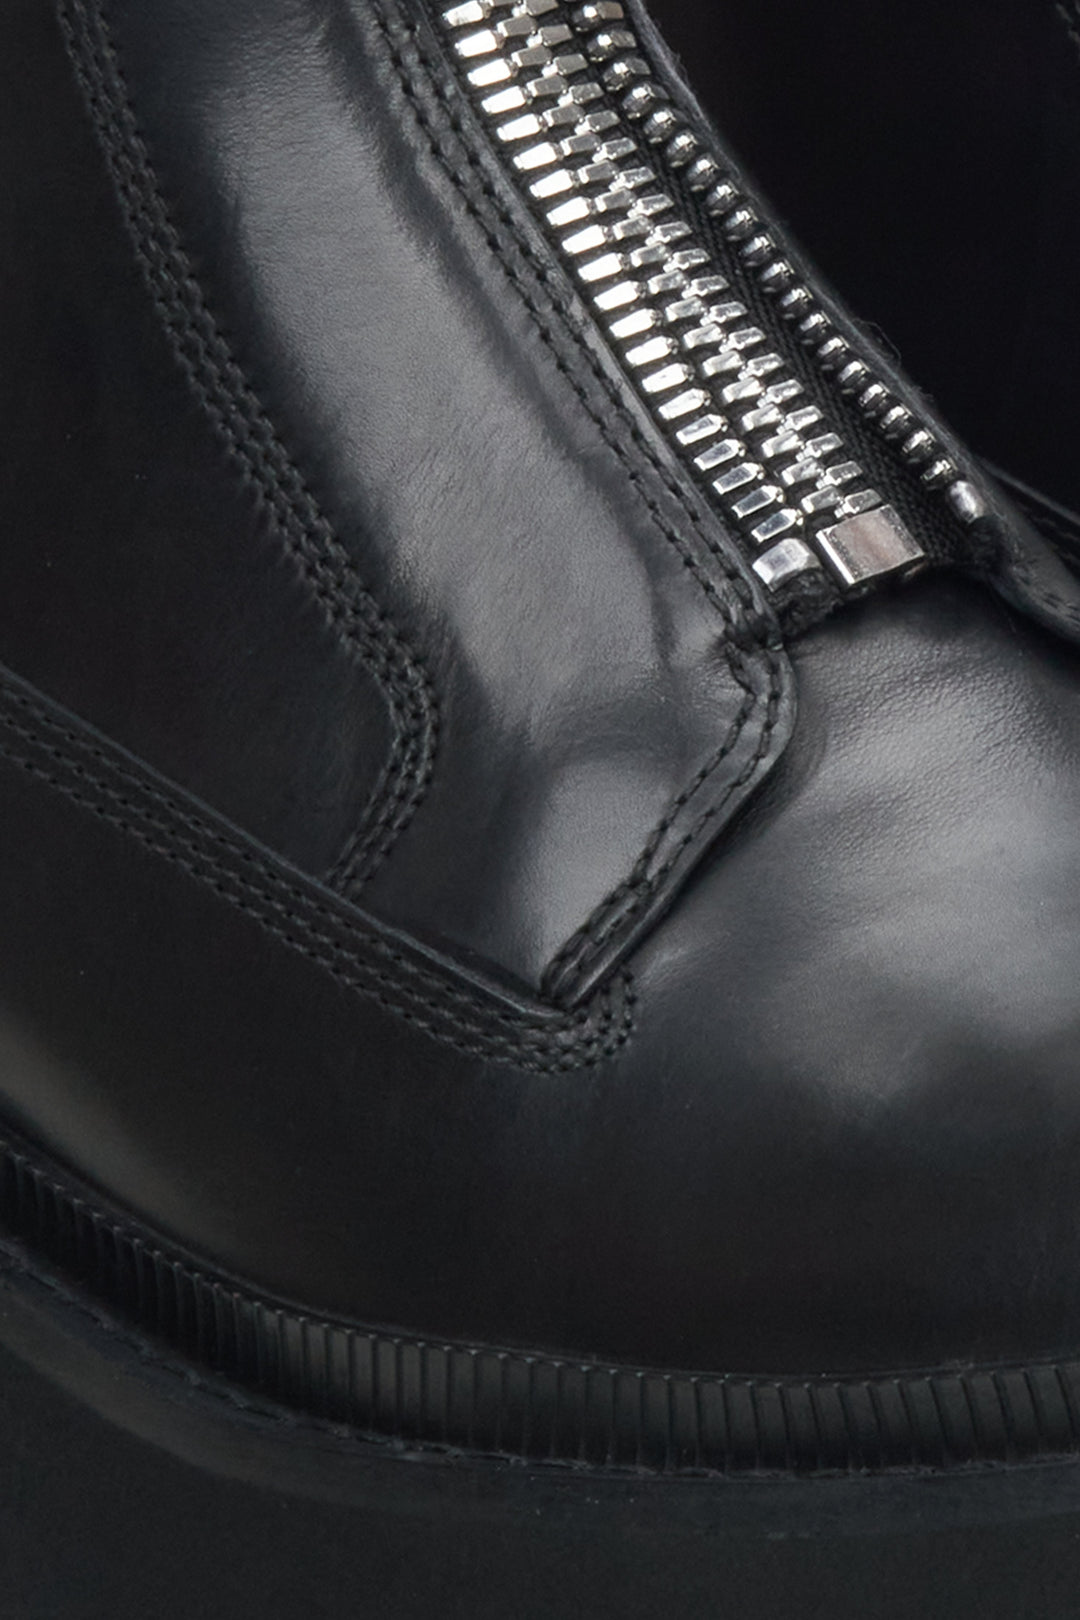 Women's black leather boots by Estro - close-up on details.